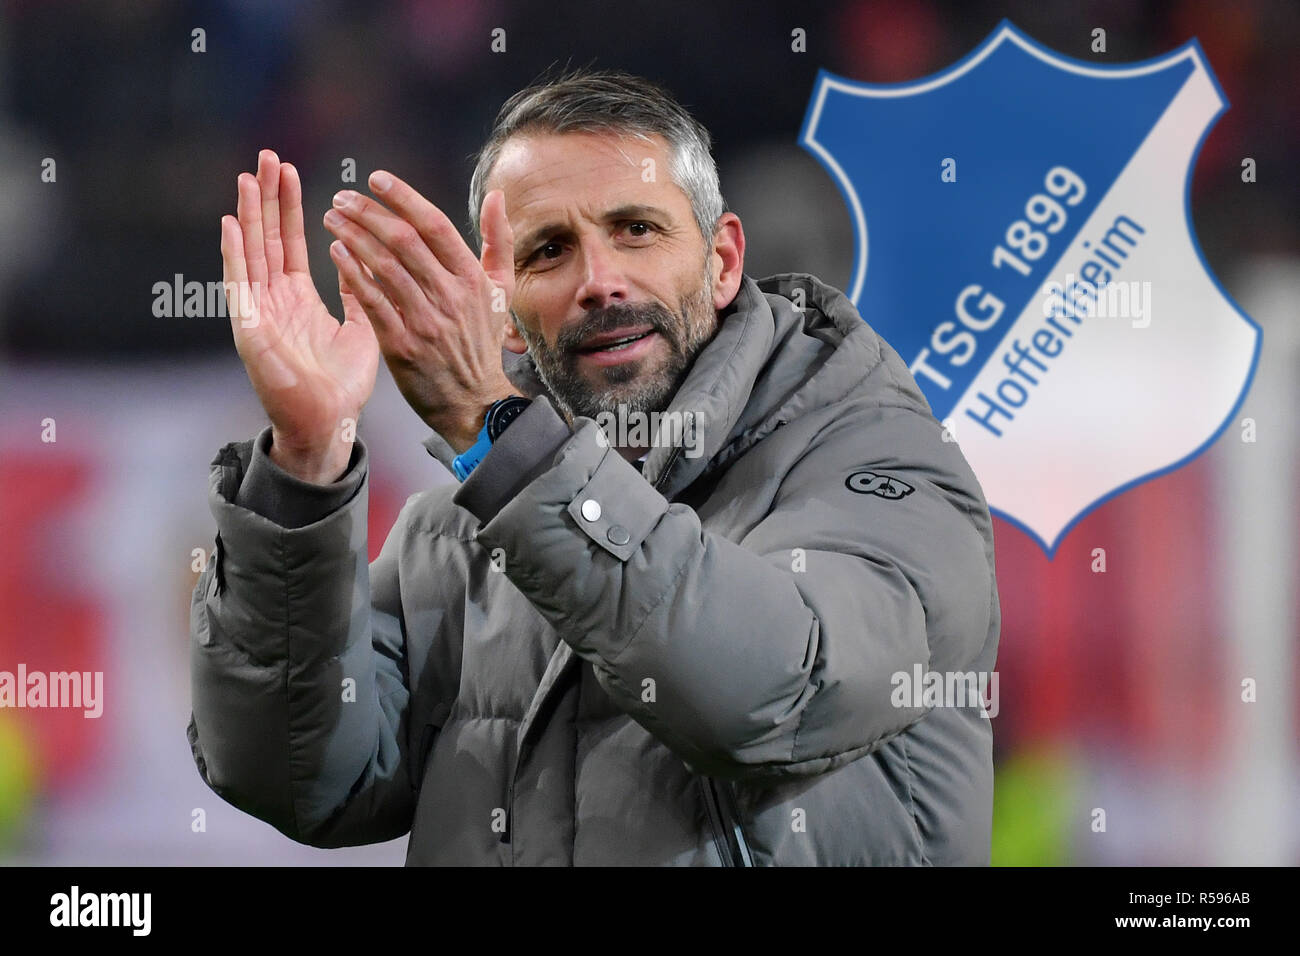 PHOTO INSTALLATION: Marco ROSE could soon take on the role of head coach at TSG Hoffenheim, archival photo: Marco ROSE, coach (Salzburg), single shot, one-cut motif, portrait, portrait, portrait. Soccer European League, Group stage, Group B, 5th matchday, Salzburg (SL) -RB Leipzig (L) 1-0, on 29/11/2018 Stadion Salzburg. | usage worldwide Stock Photo